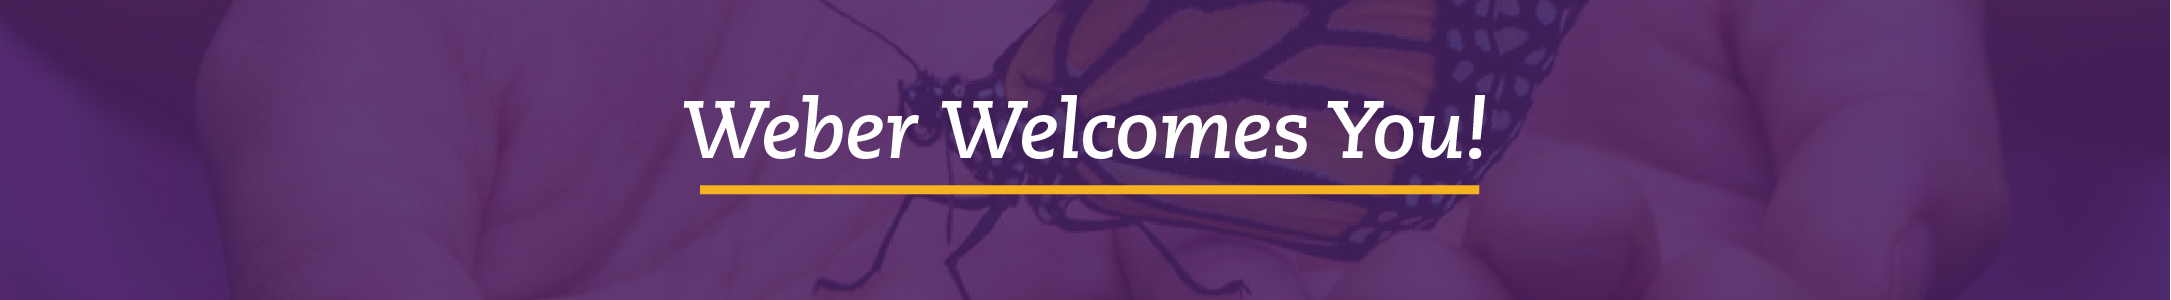 Weber Welcomes You!